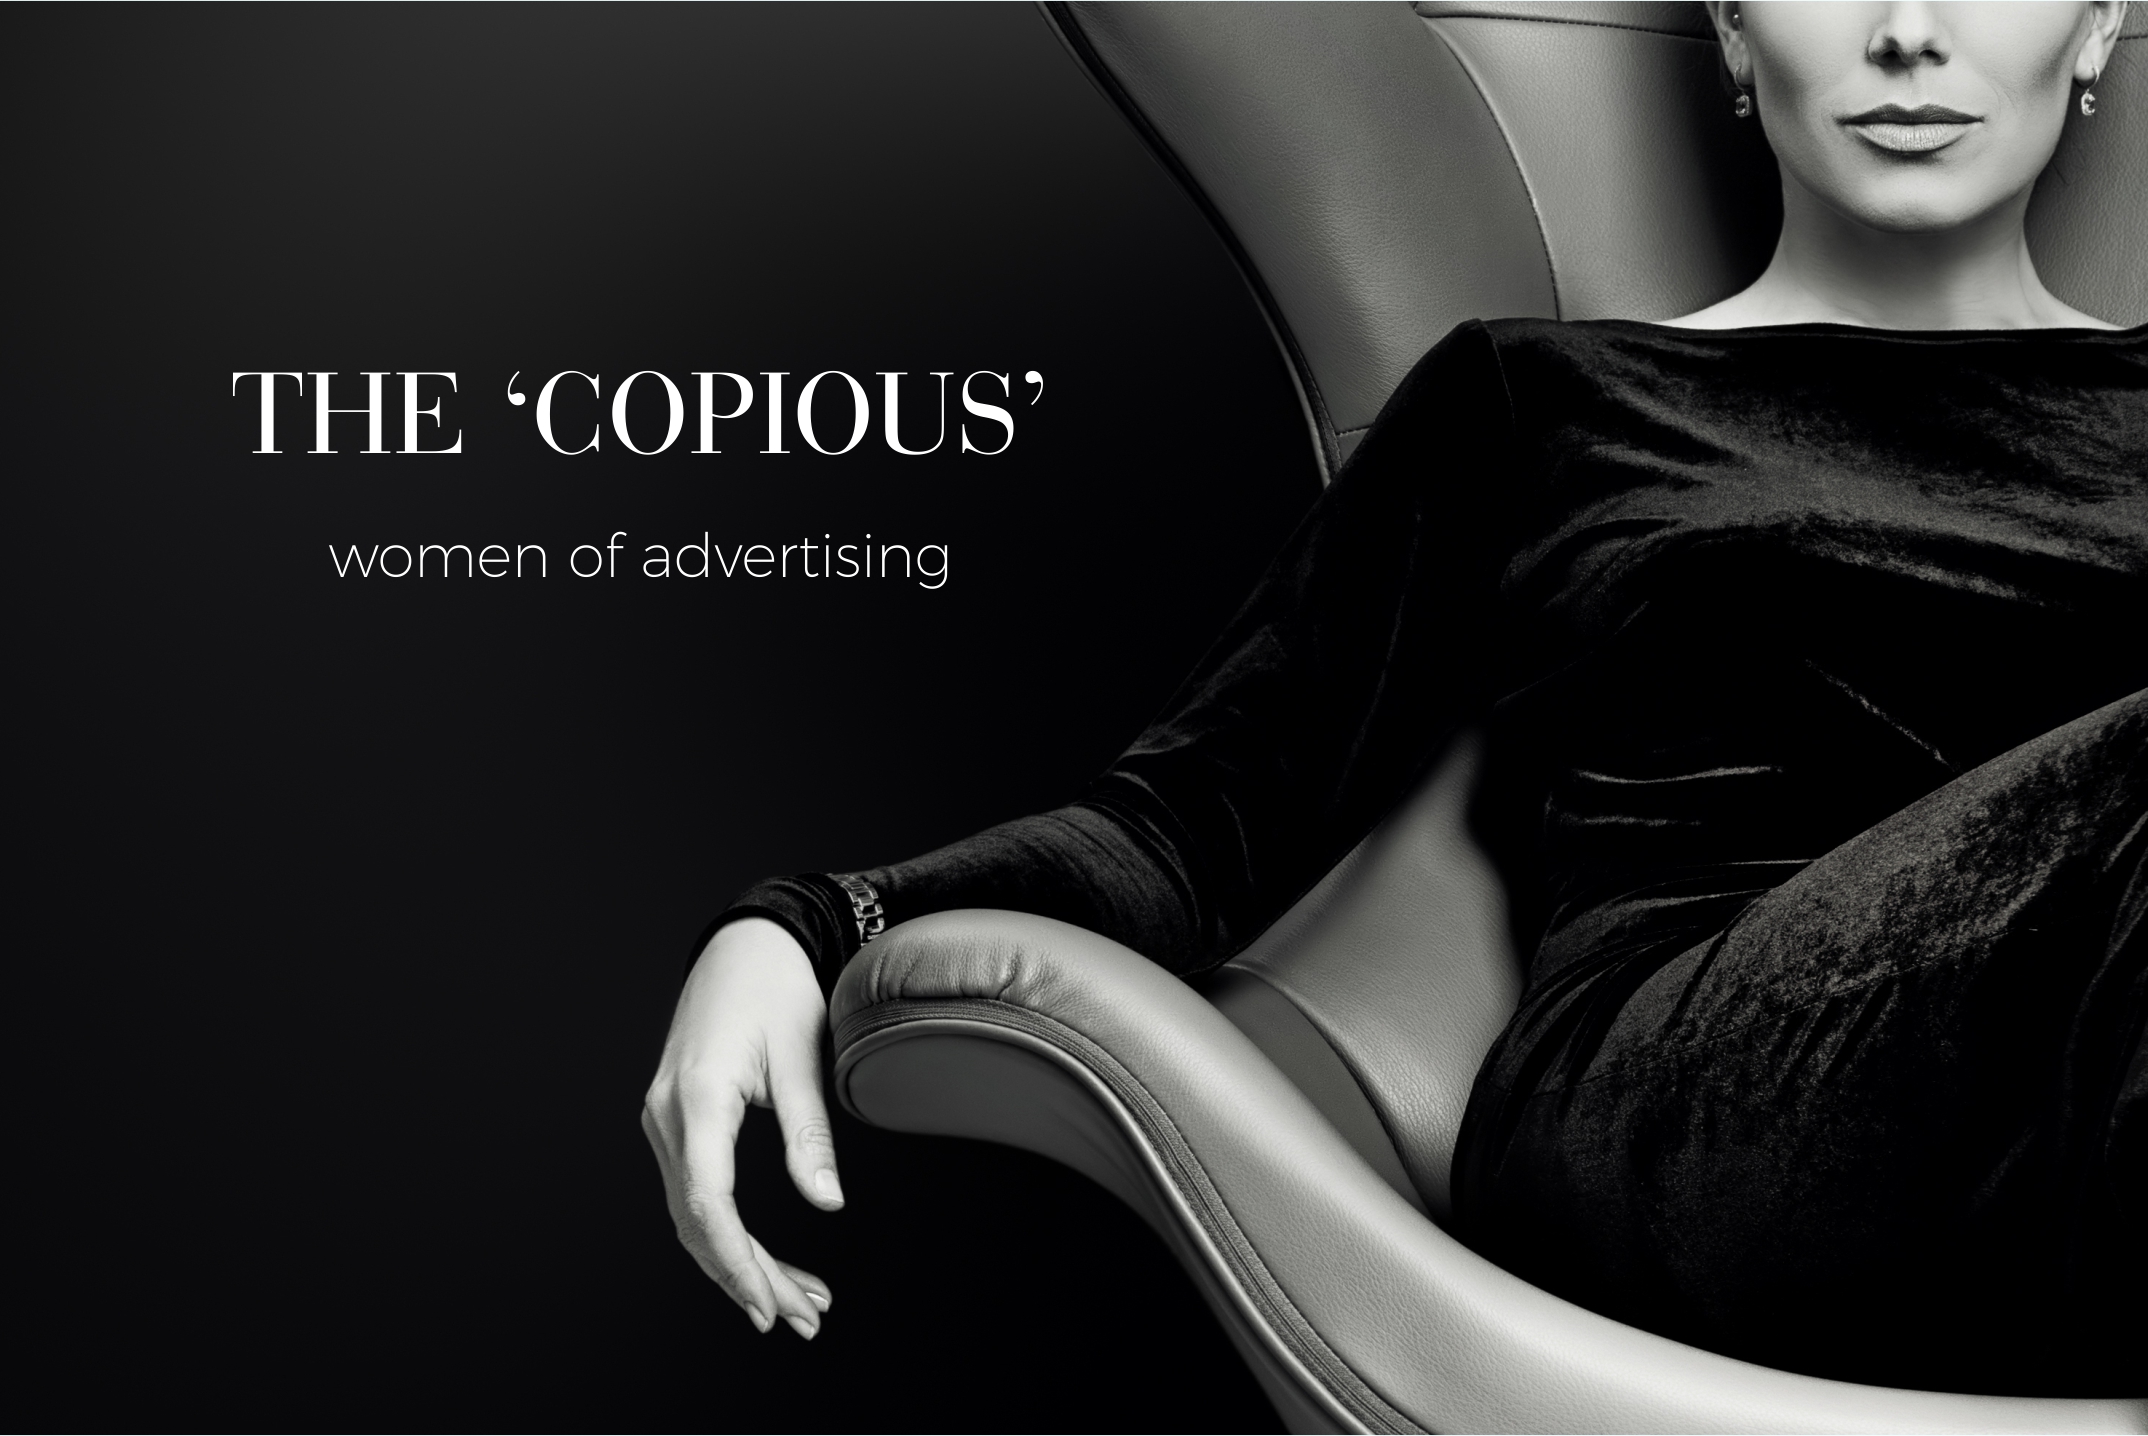 The ‘copious’ women of advertising